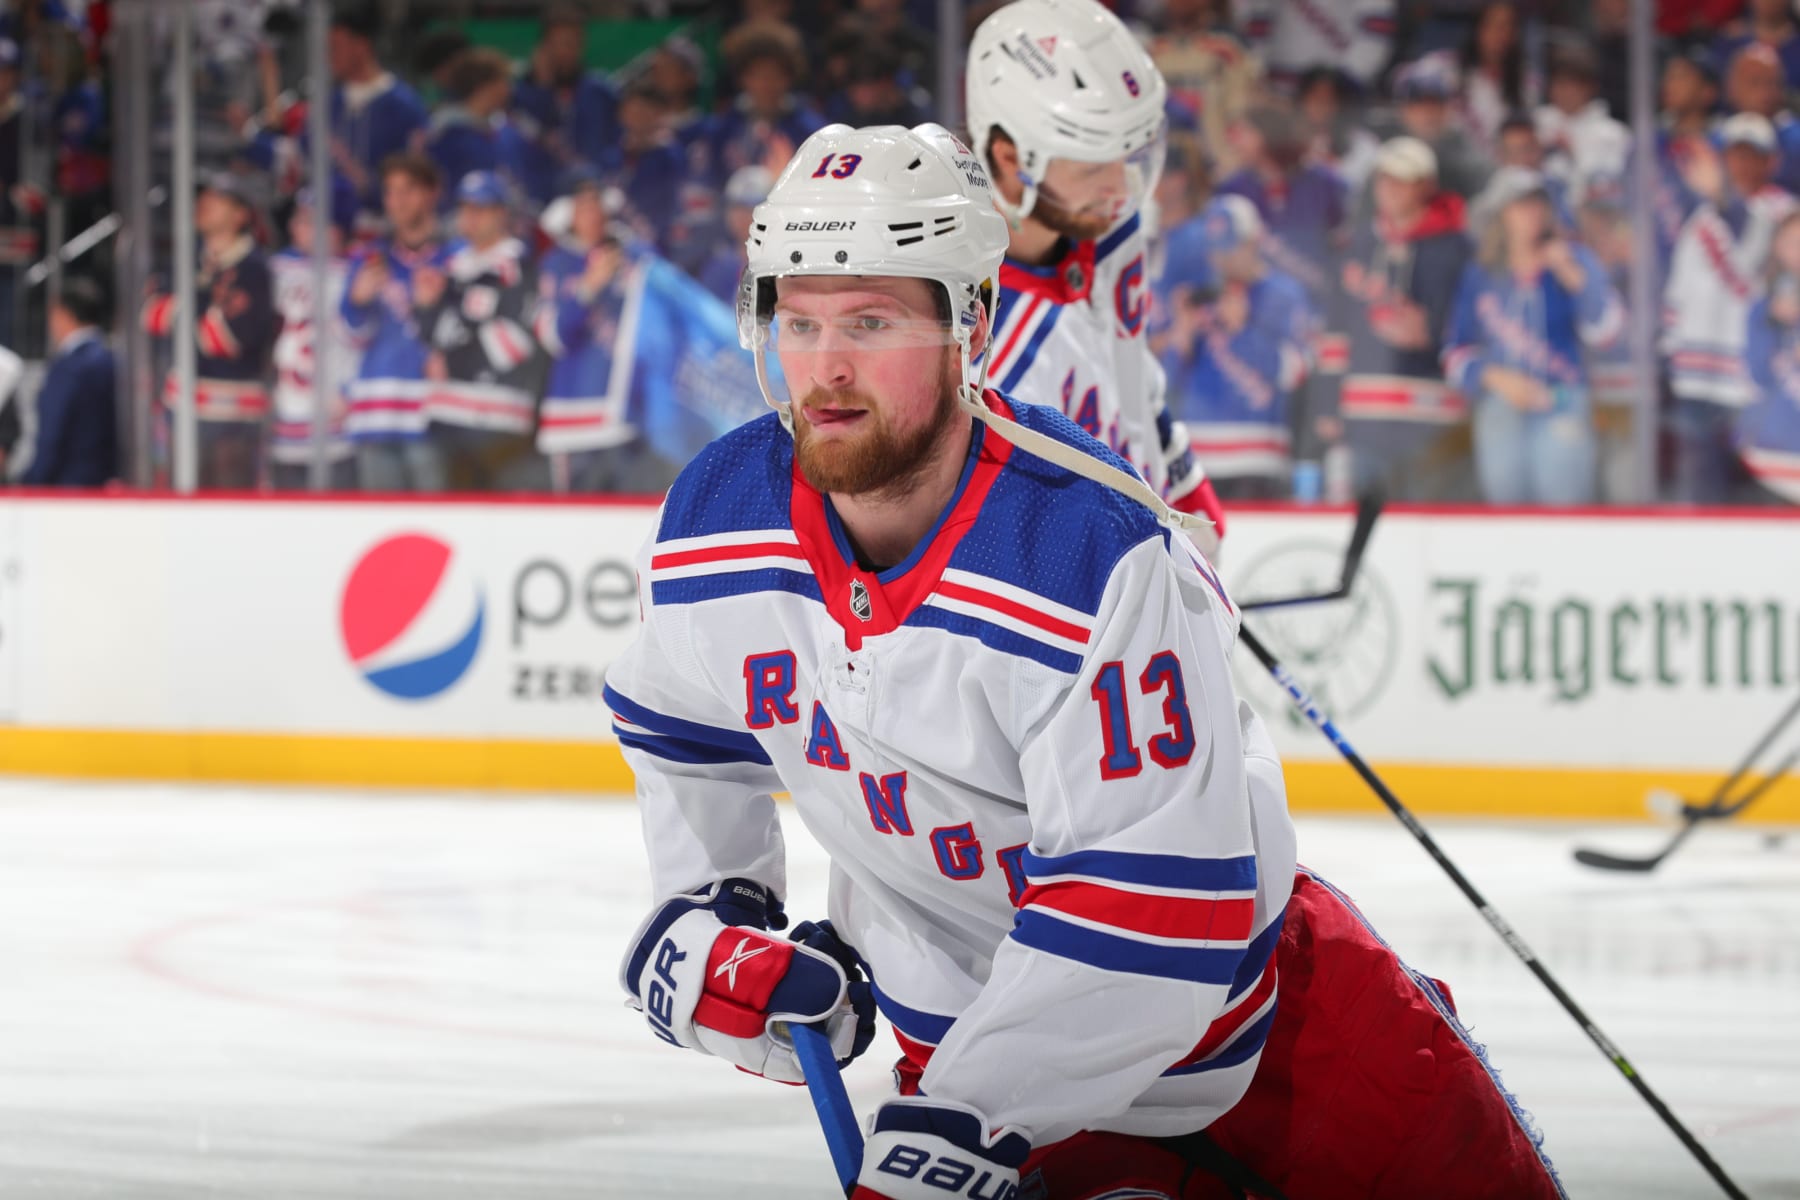 Three Teams That Could Trade for New York Rangers Alexis Lafreniere